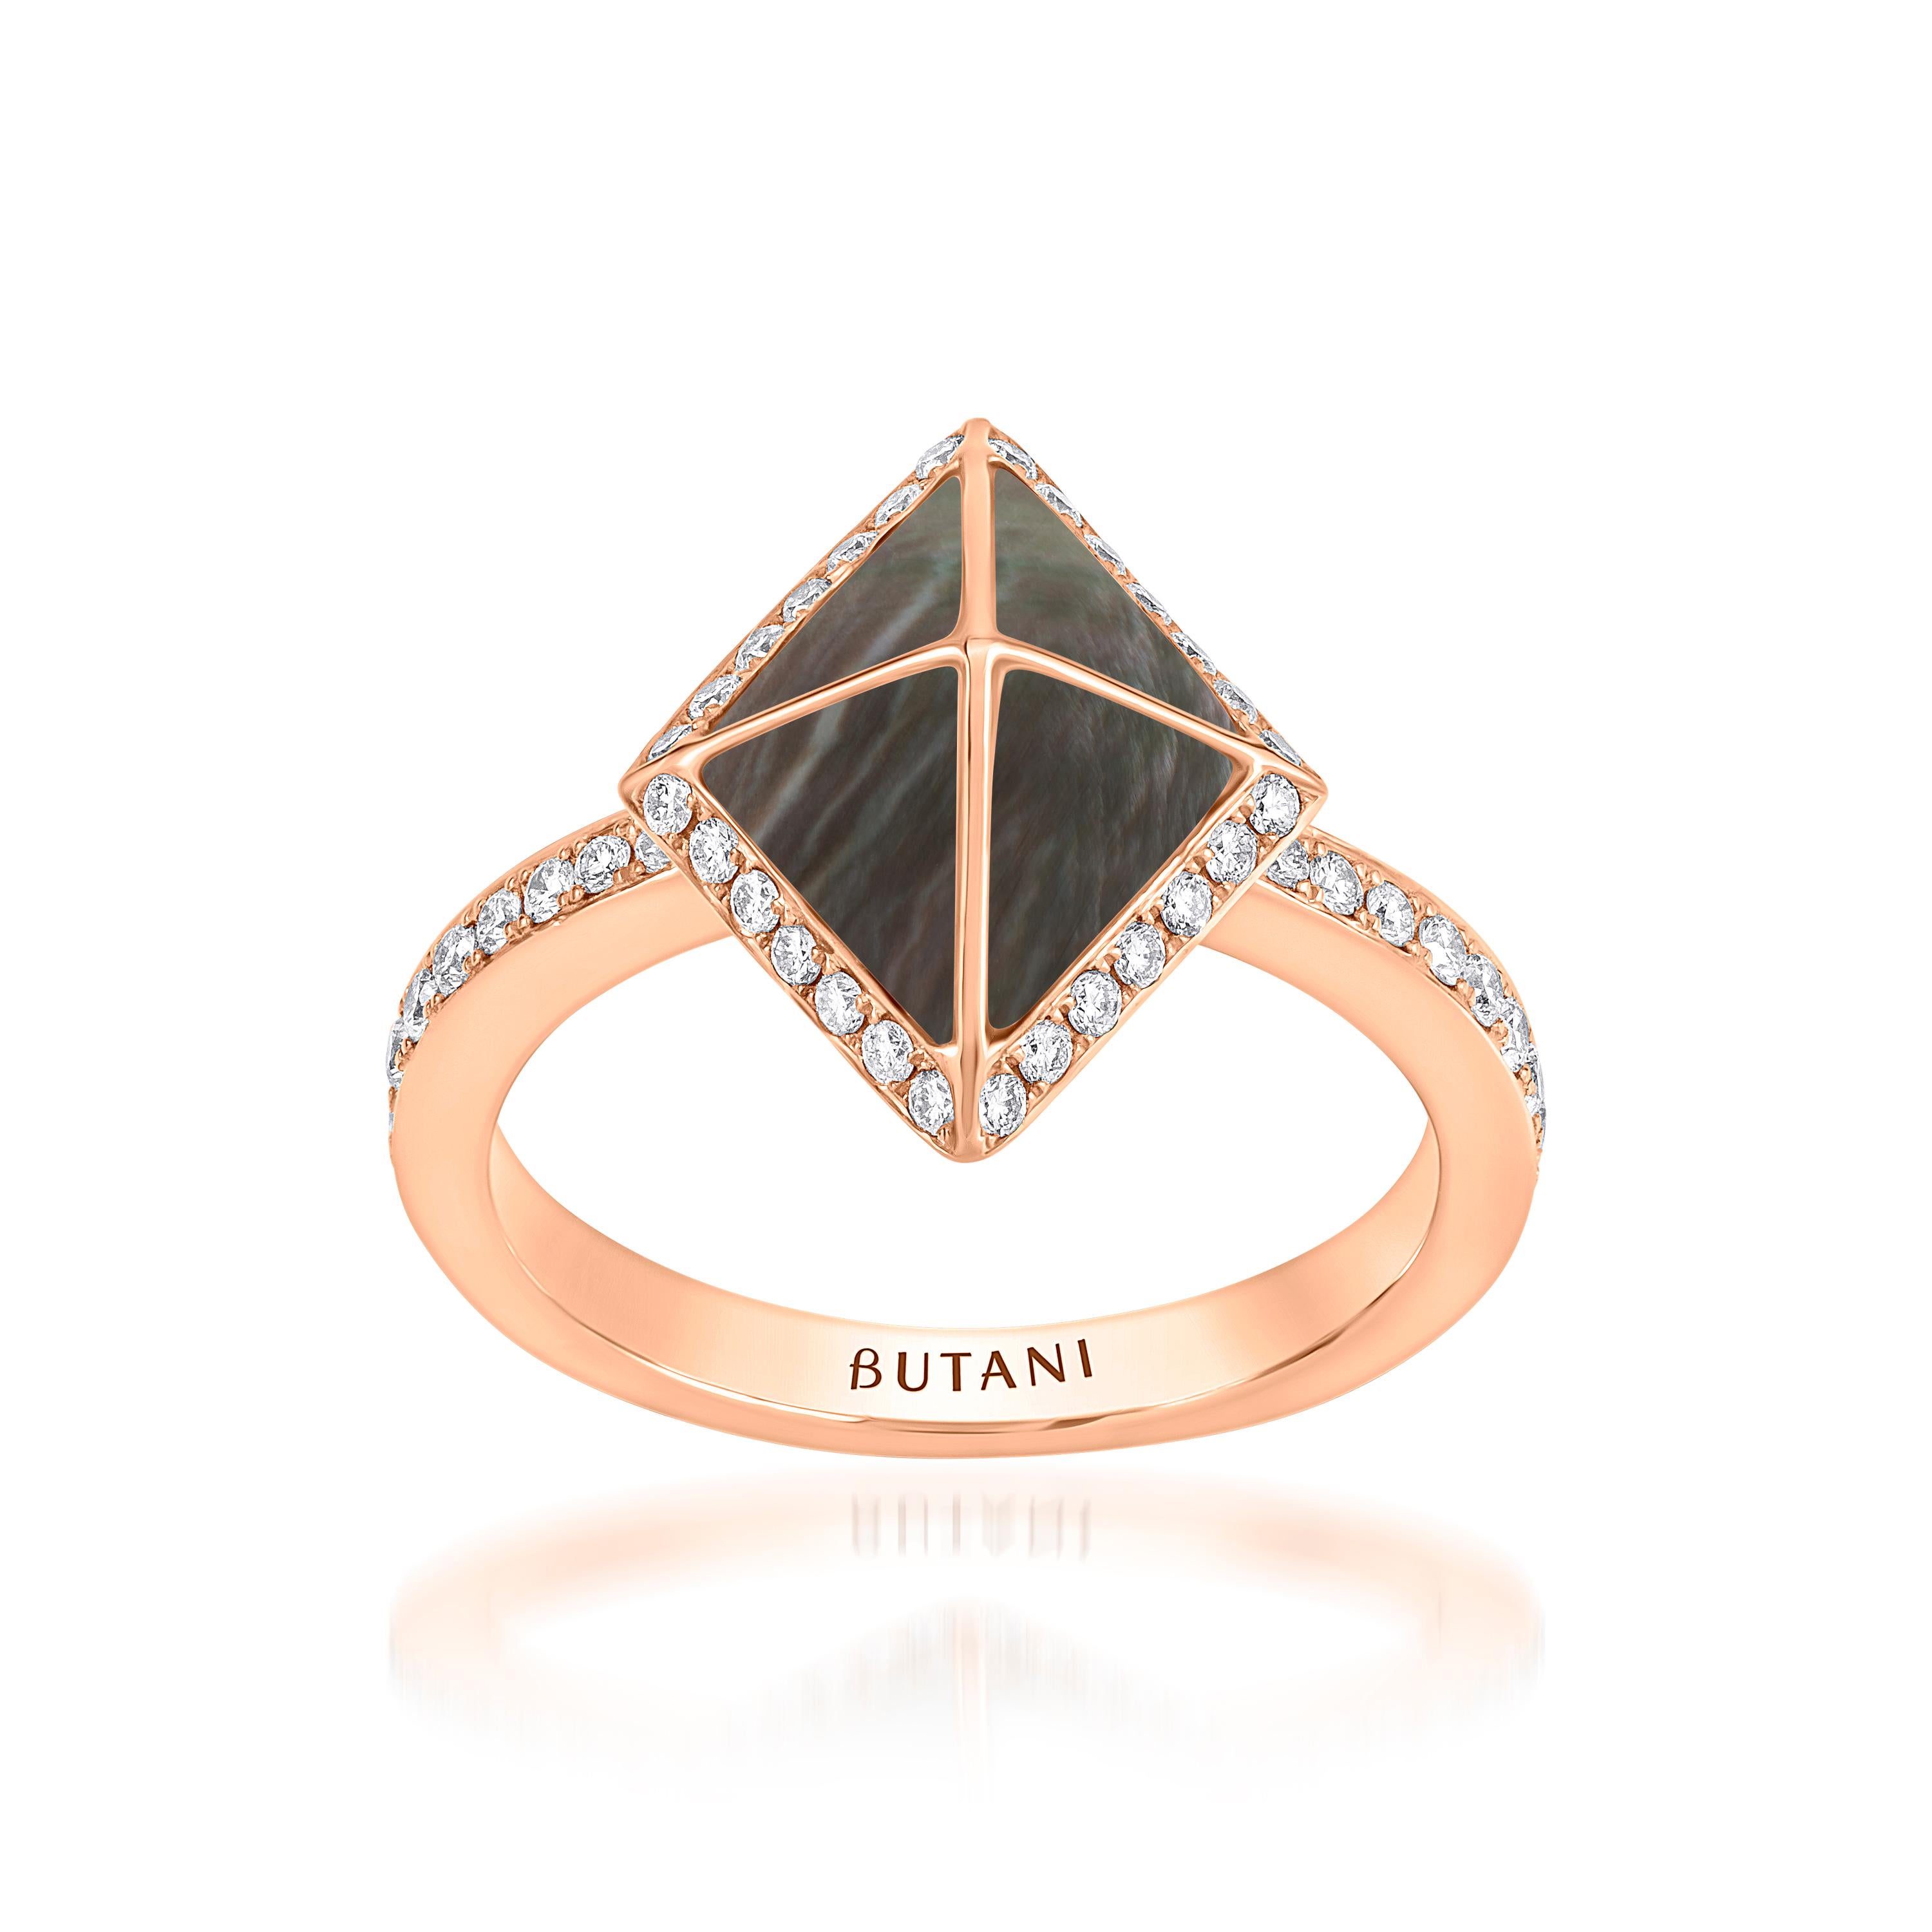 Through graphic, contemporary lines, Butani’s Tetra collection celebrates the beauty of symmetry while reimagining classic motifs of the past. 

Powerful and elegant, the Tetra Zenith Ring draws eyes and forms a striking focal point on the finger. A